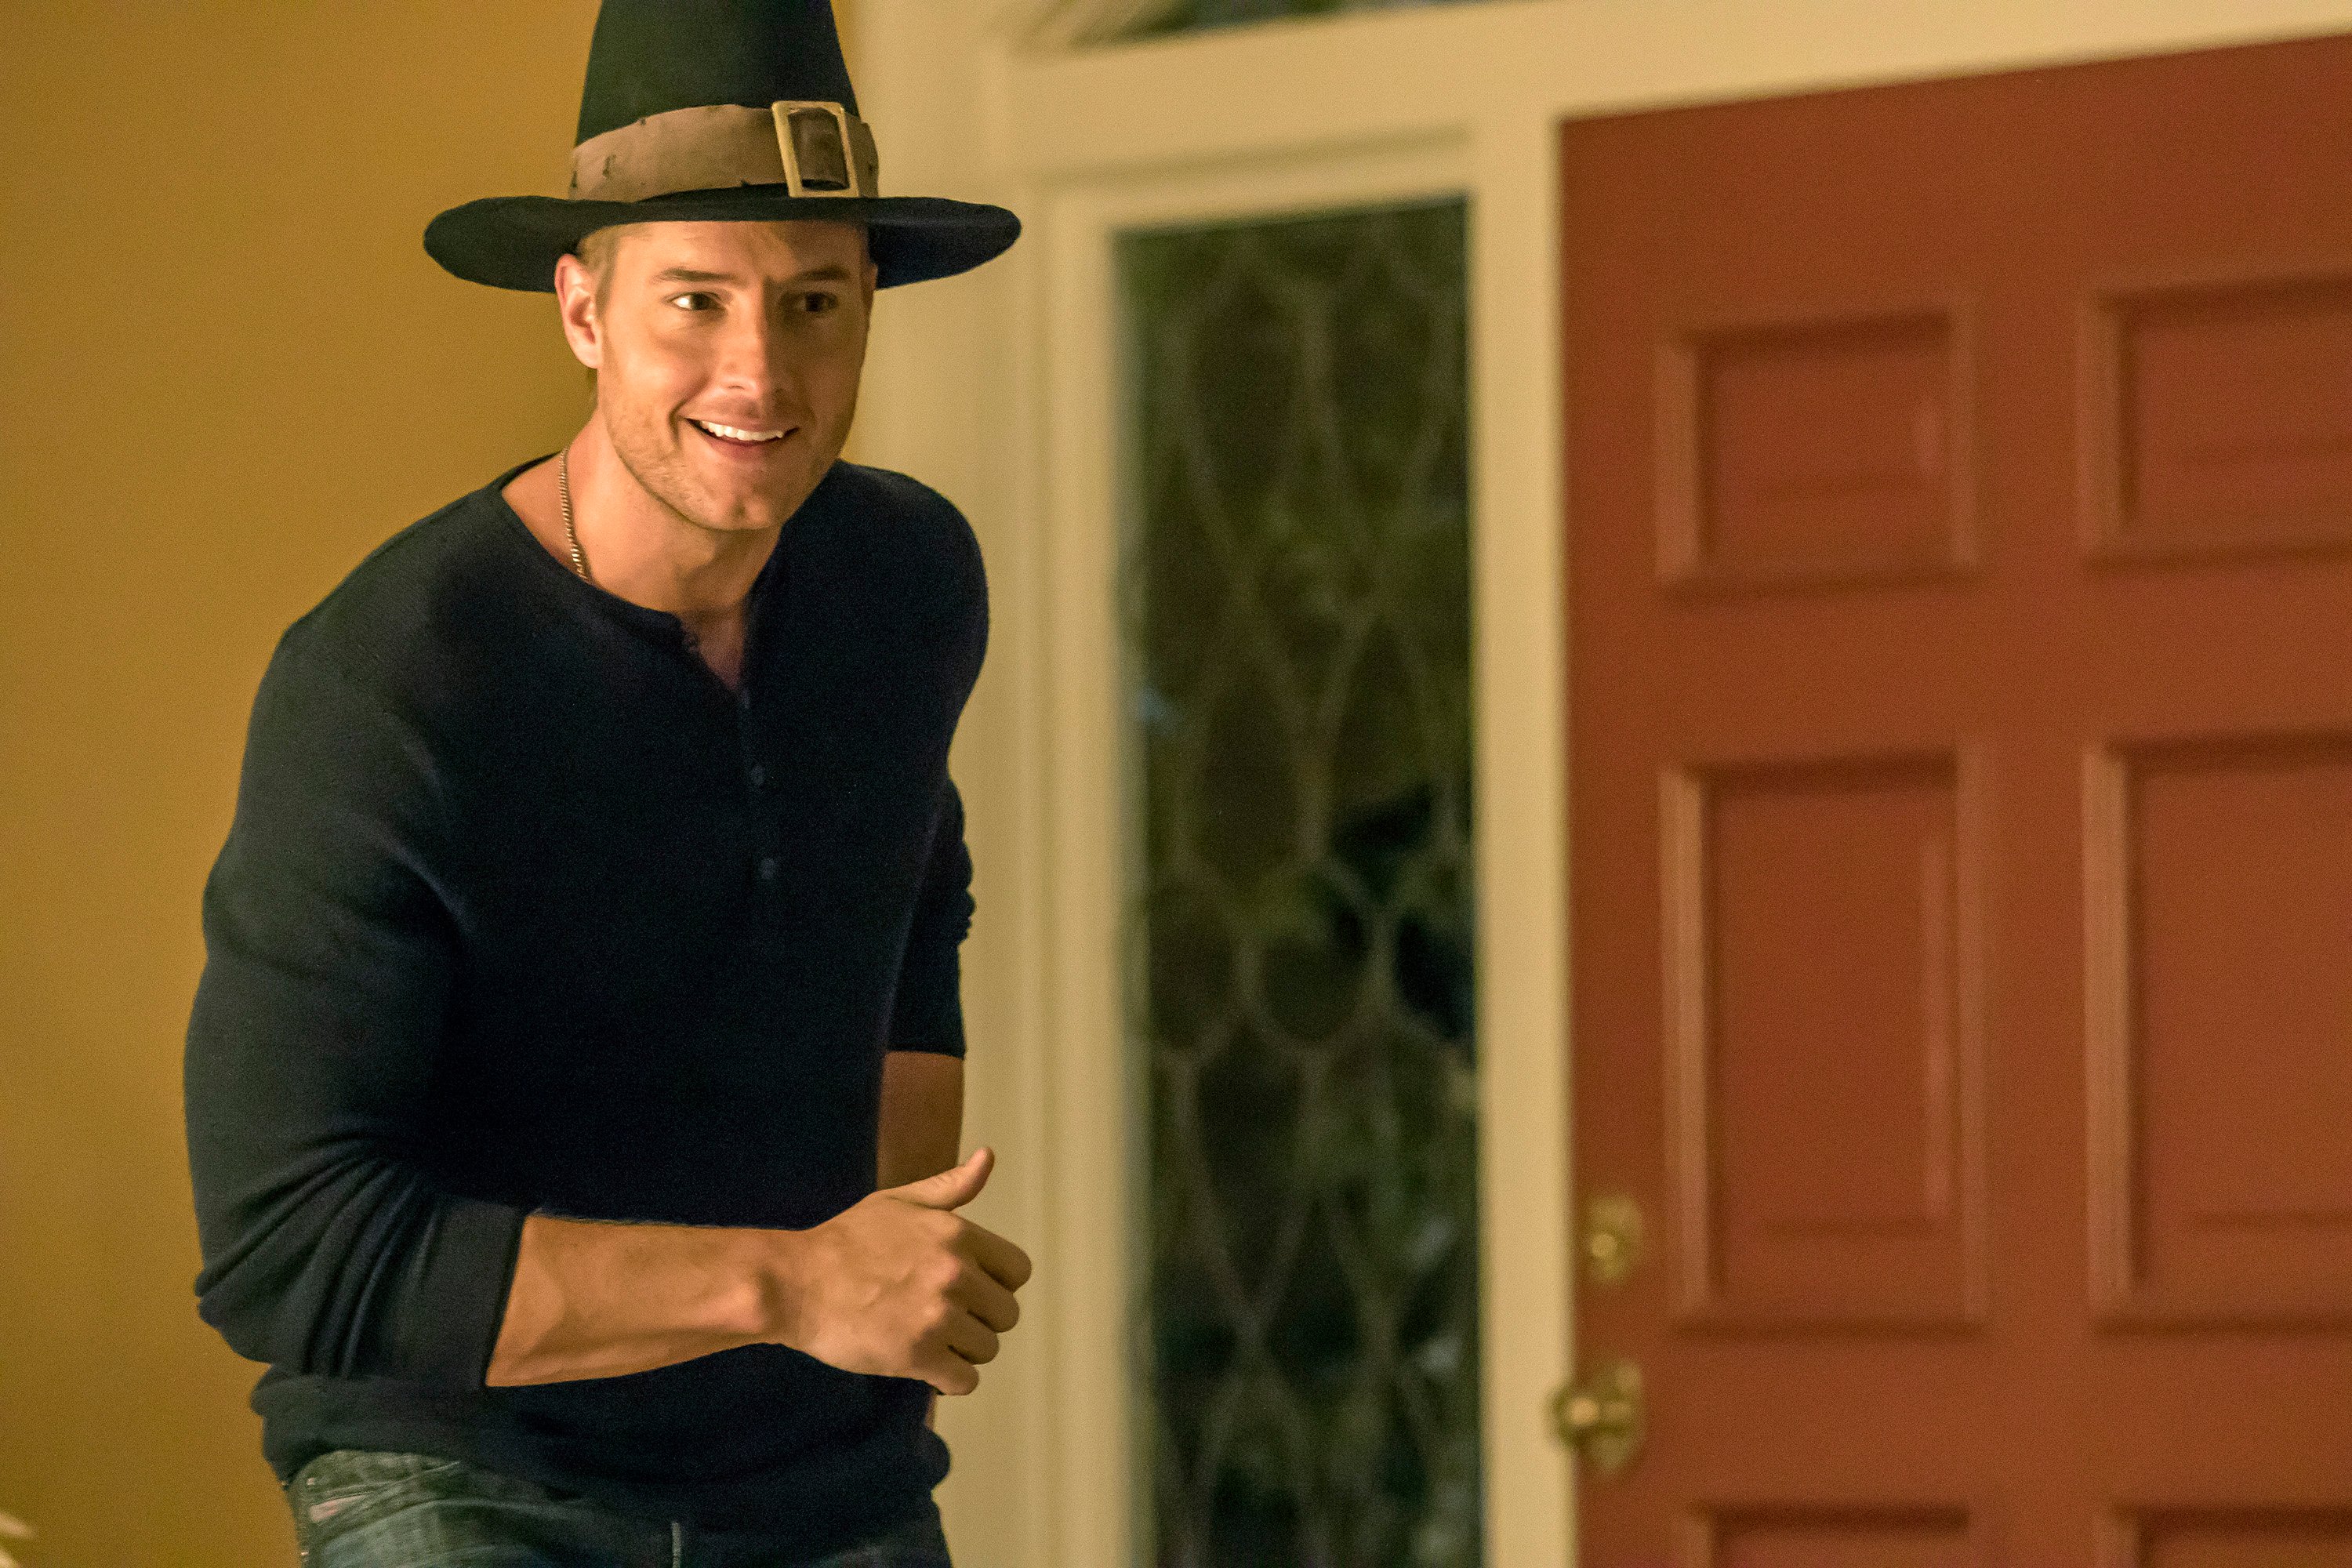 Justin Hartley, in character as Kevin in the Thanksgiving episode of 'This Is Us' Season 1, wears a black Henley shirt, jeans, and the Pilgrim Rick hat.